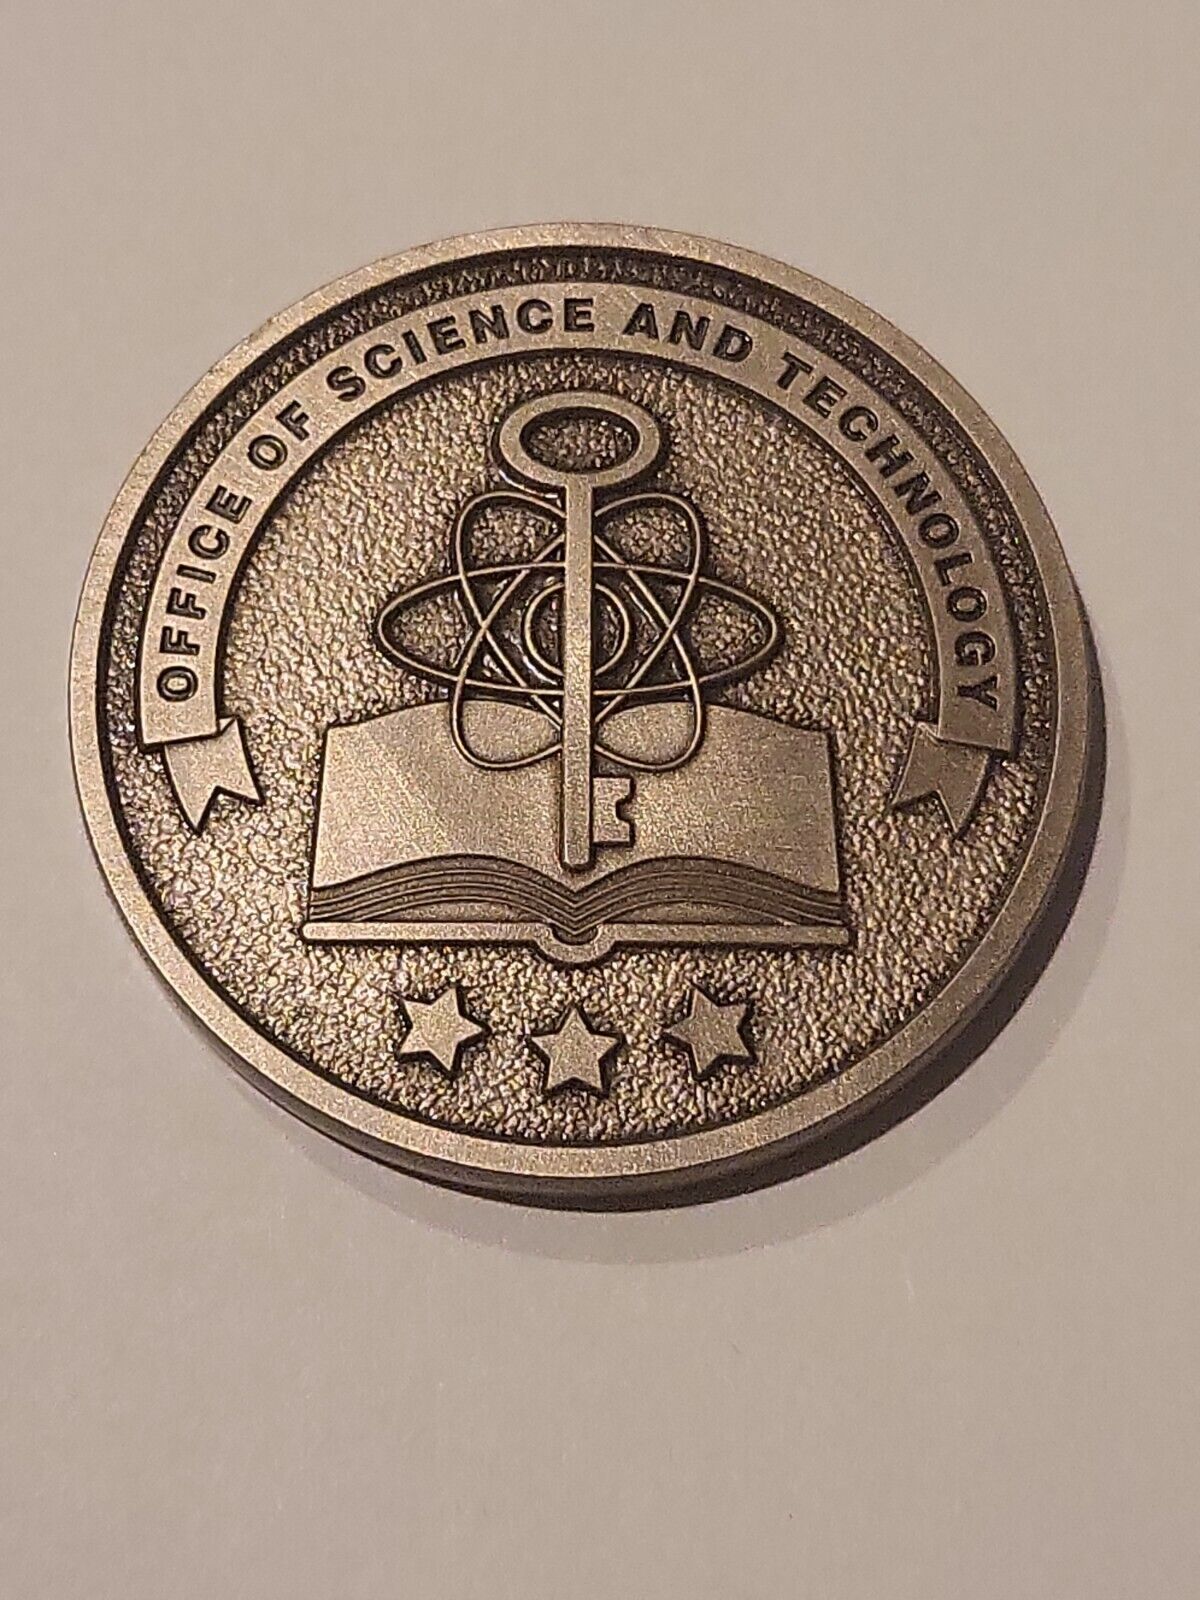 Rare Alcohol tobacco firearms explosives SCIENCE AND TECHNOLOGY CHALLENGE COIN 